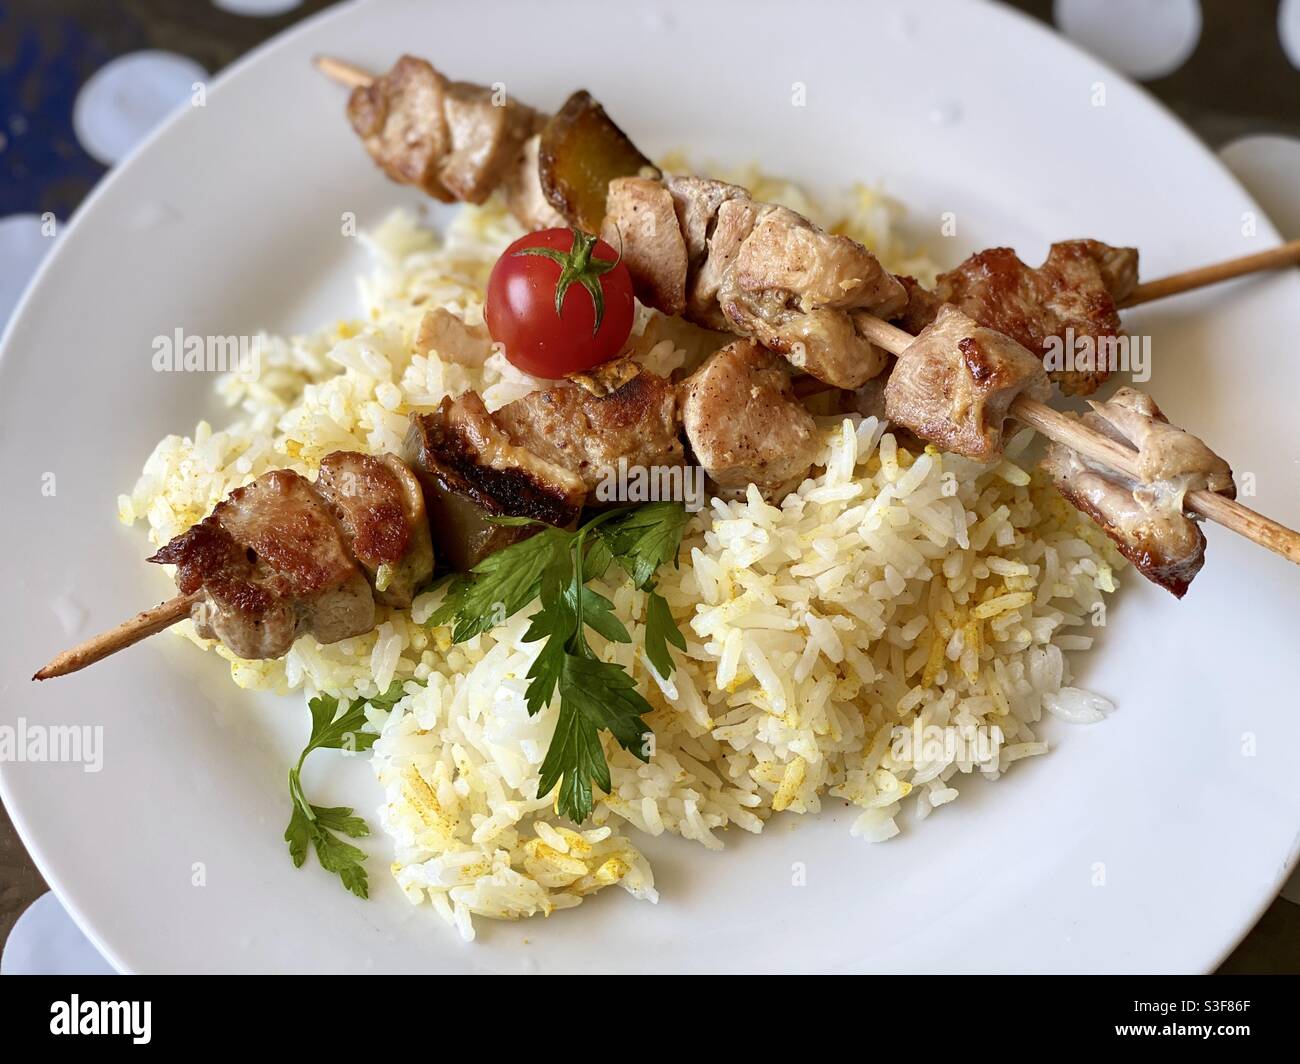 Pork skewers on rice with tomatoes Stock Photo